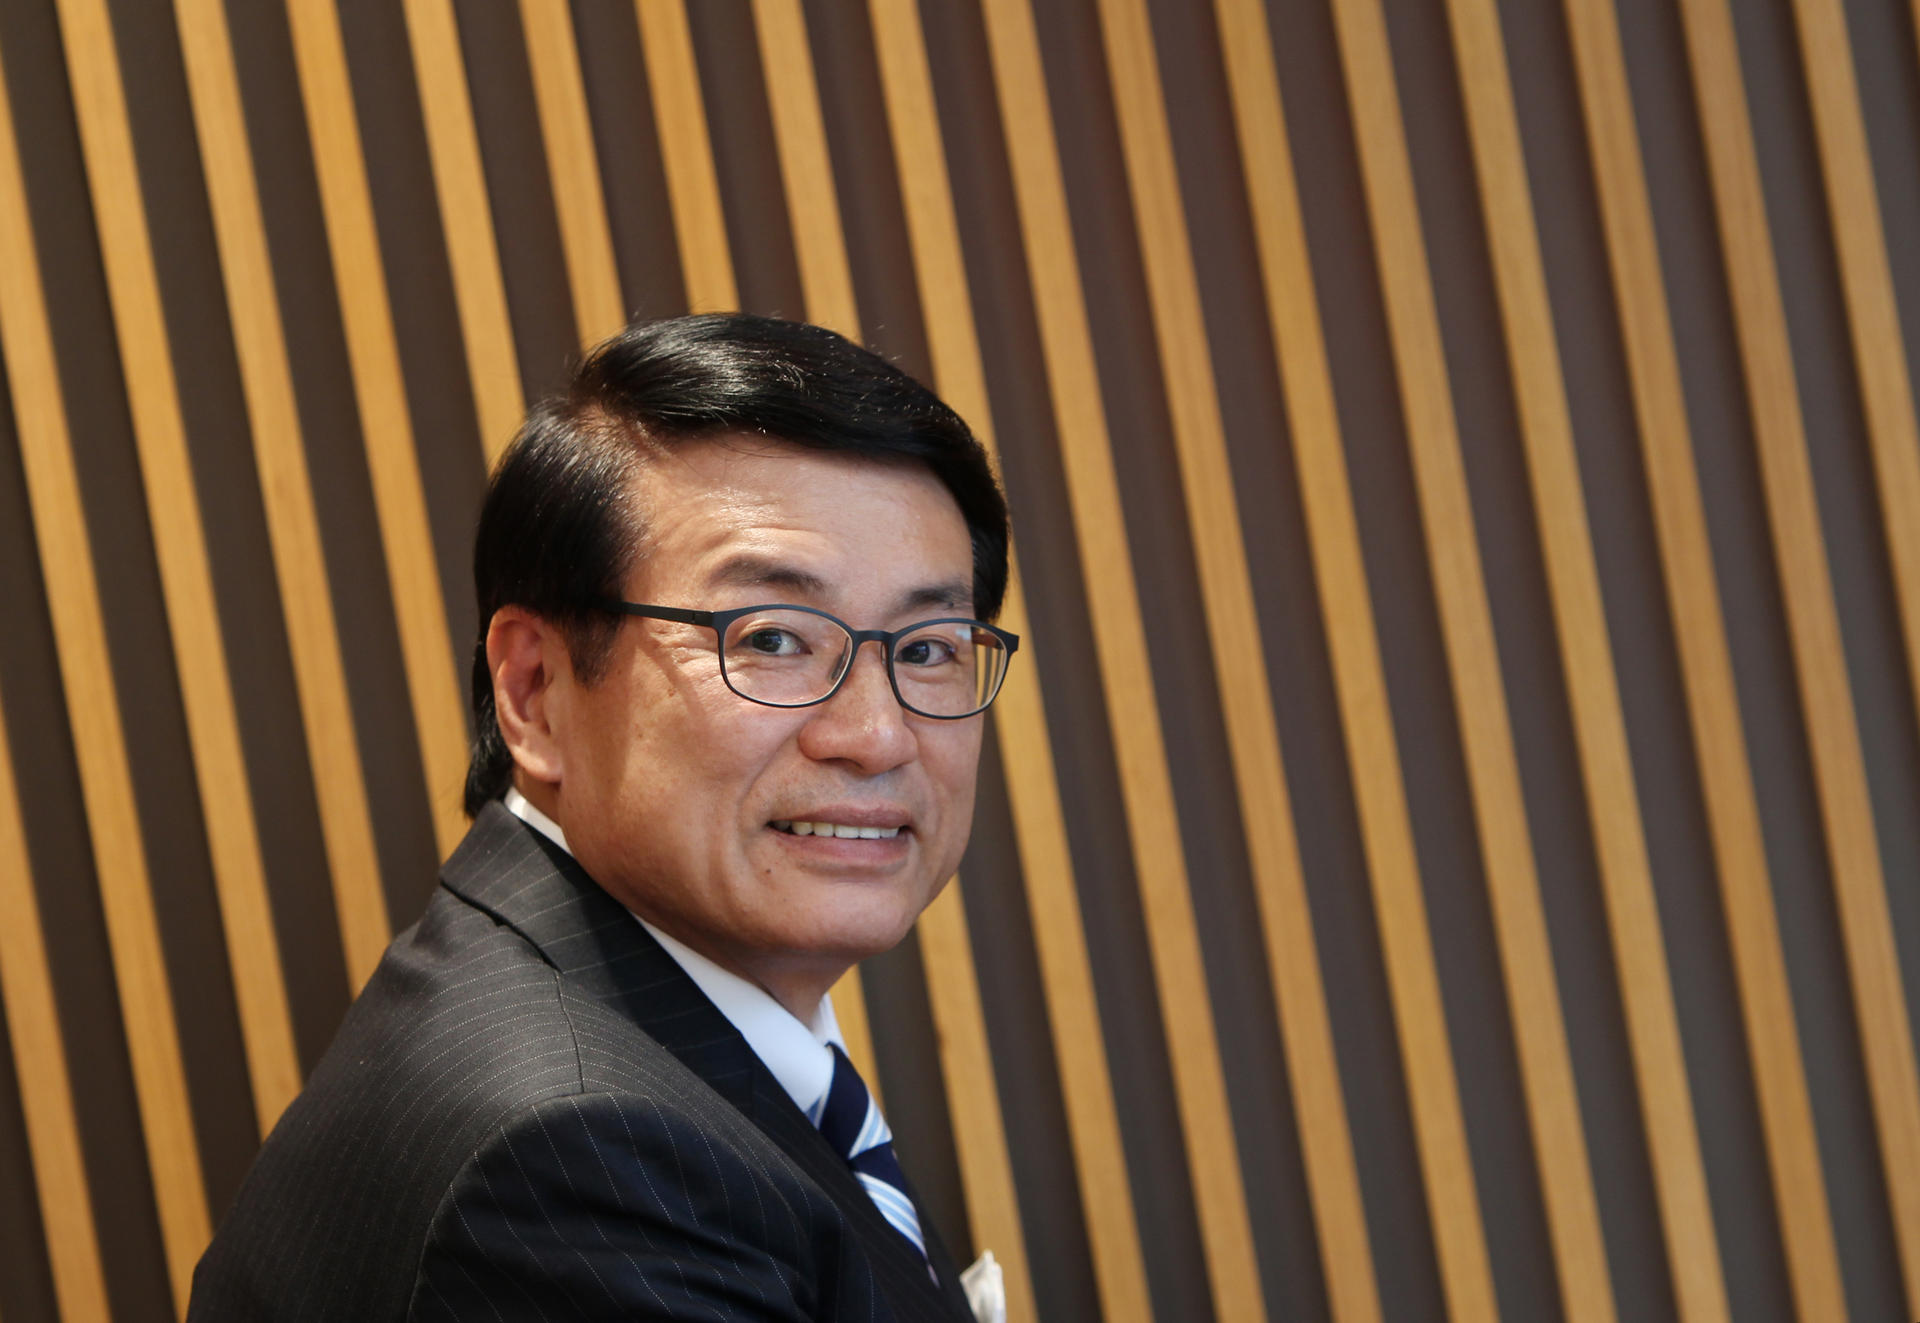 William Leung is seen as a leader in the credit card business in Hong Kong by introducing the rebate system.